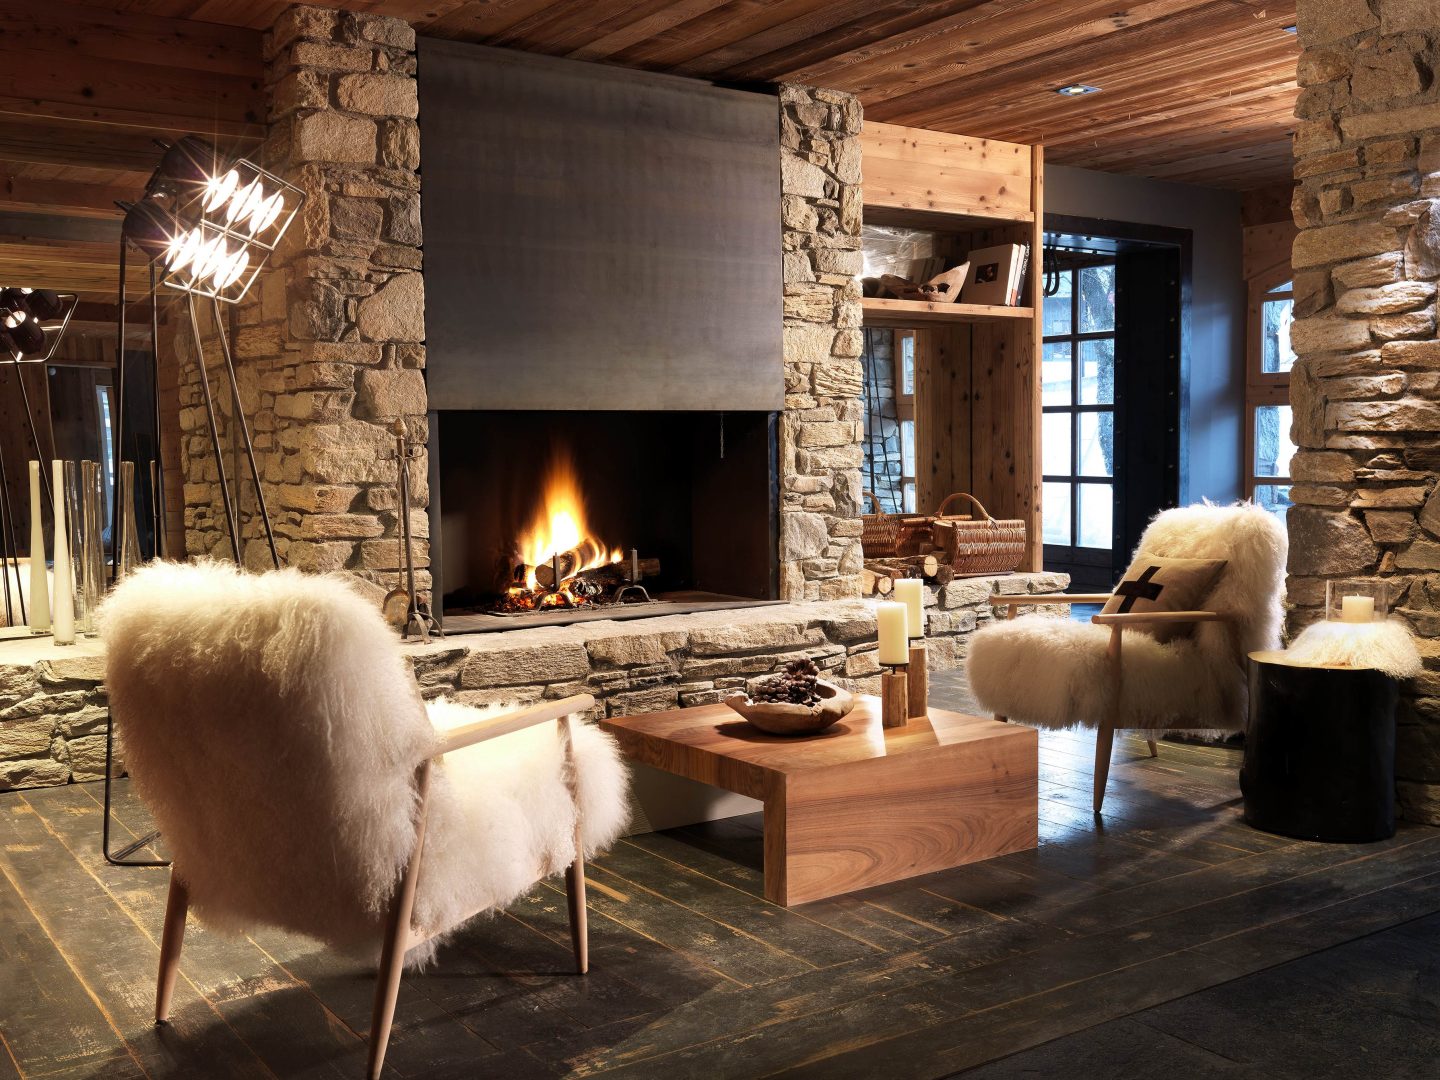 Fireplace and romantic setting in Le M de Megeve's Hotel.